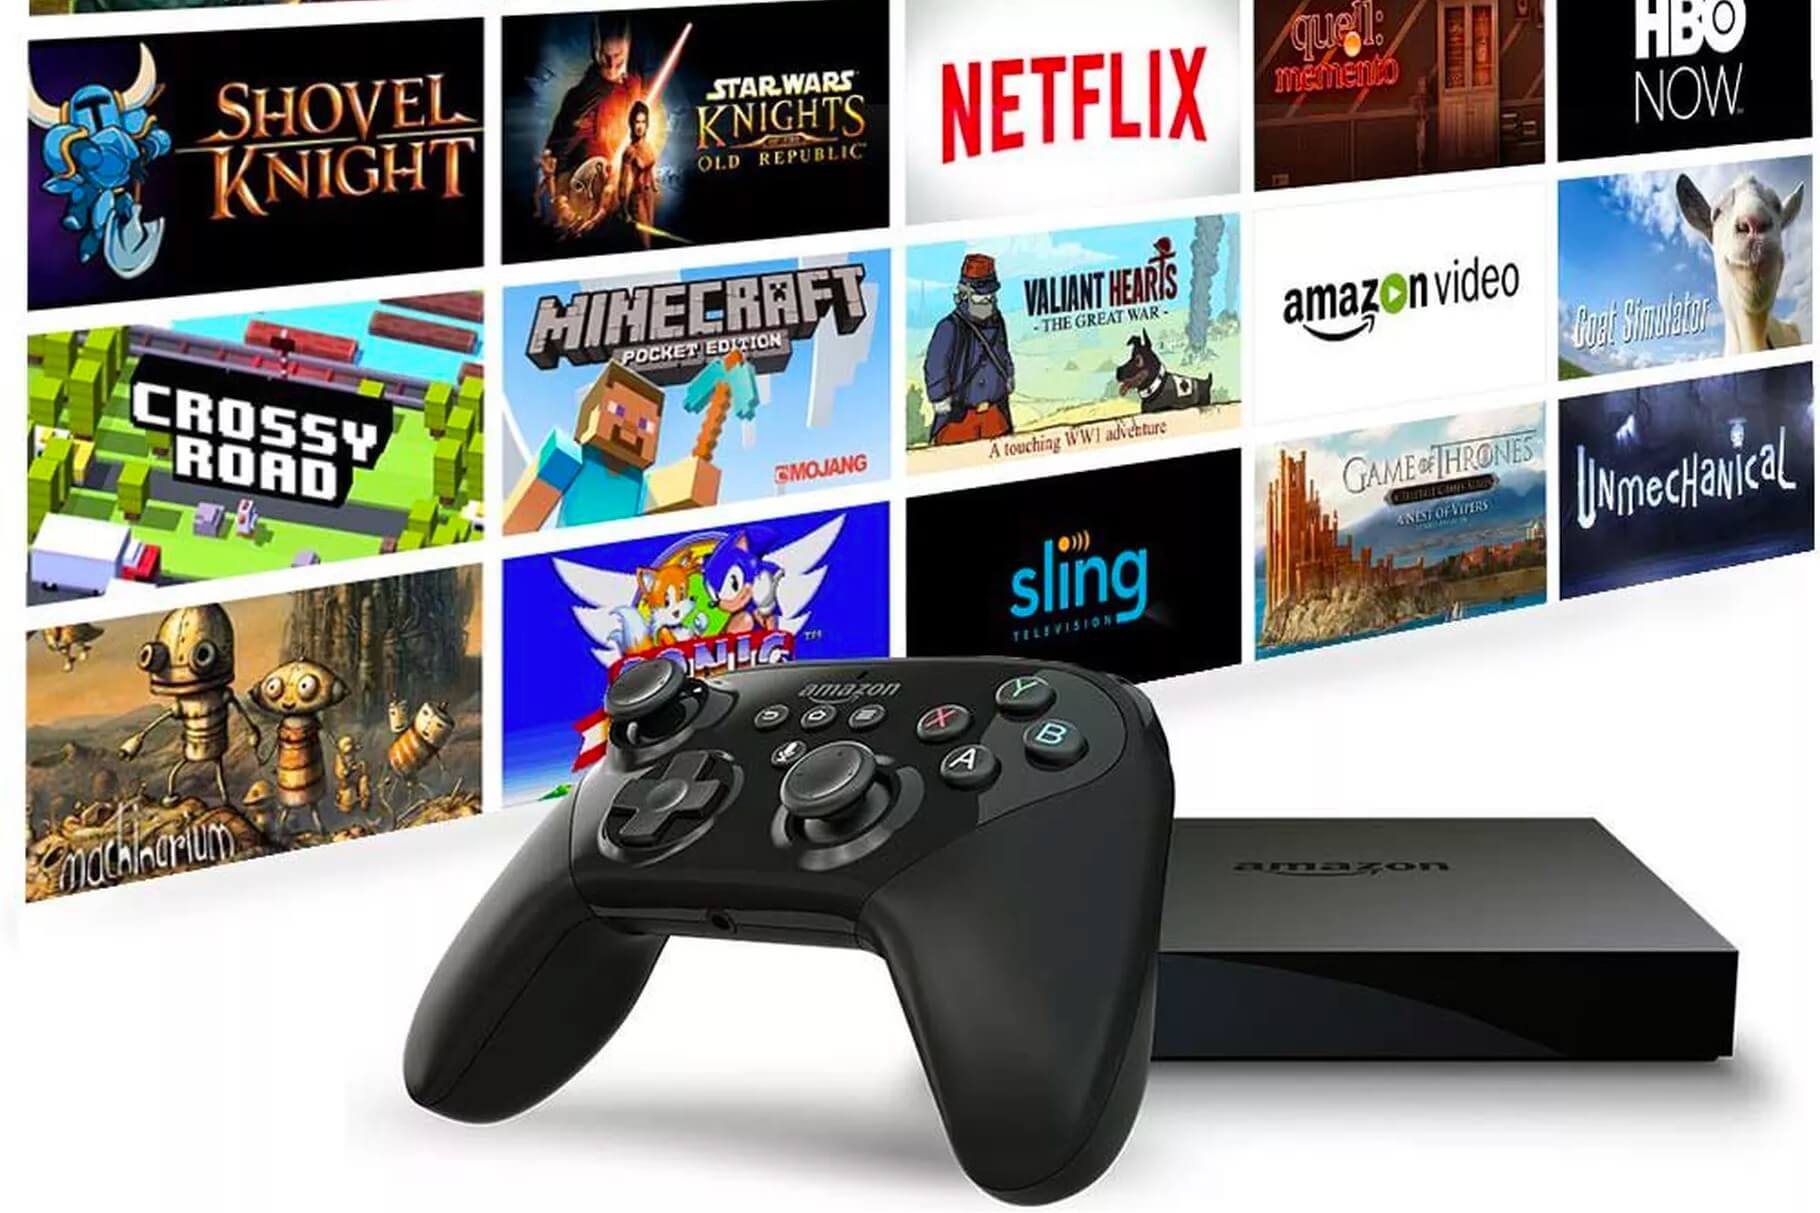 Amazon is likely designing its own cloud game streaming service